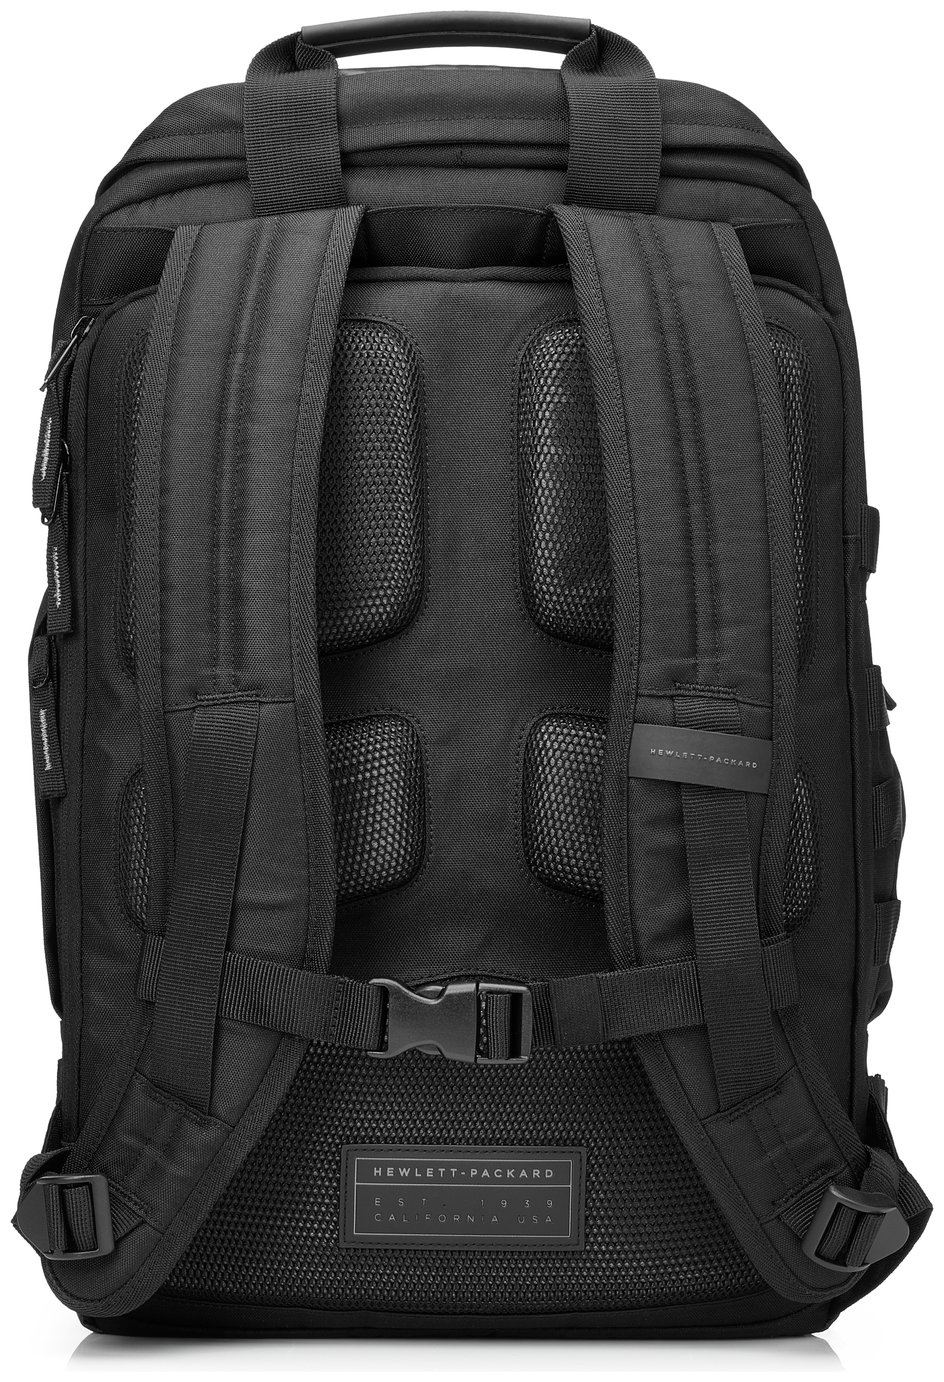 HP Odyssey 15.6 Inch Laptop Backpack Review